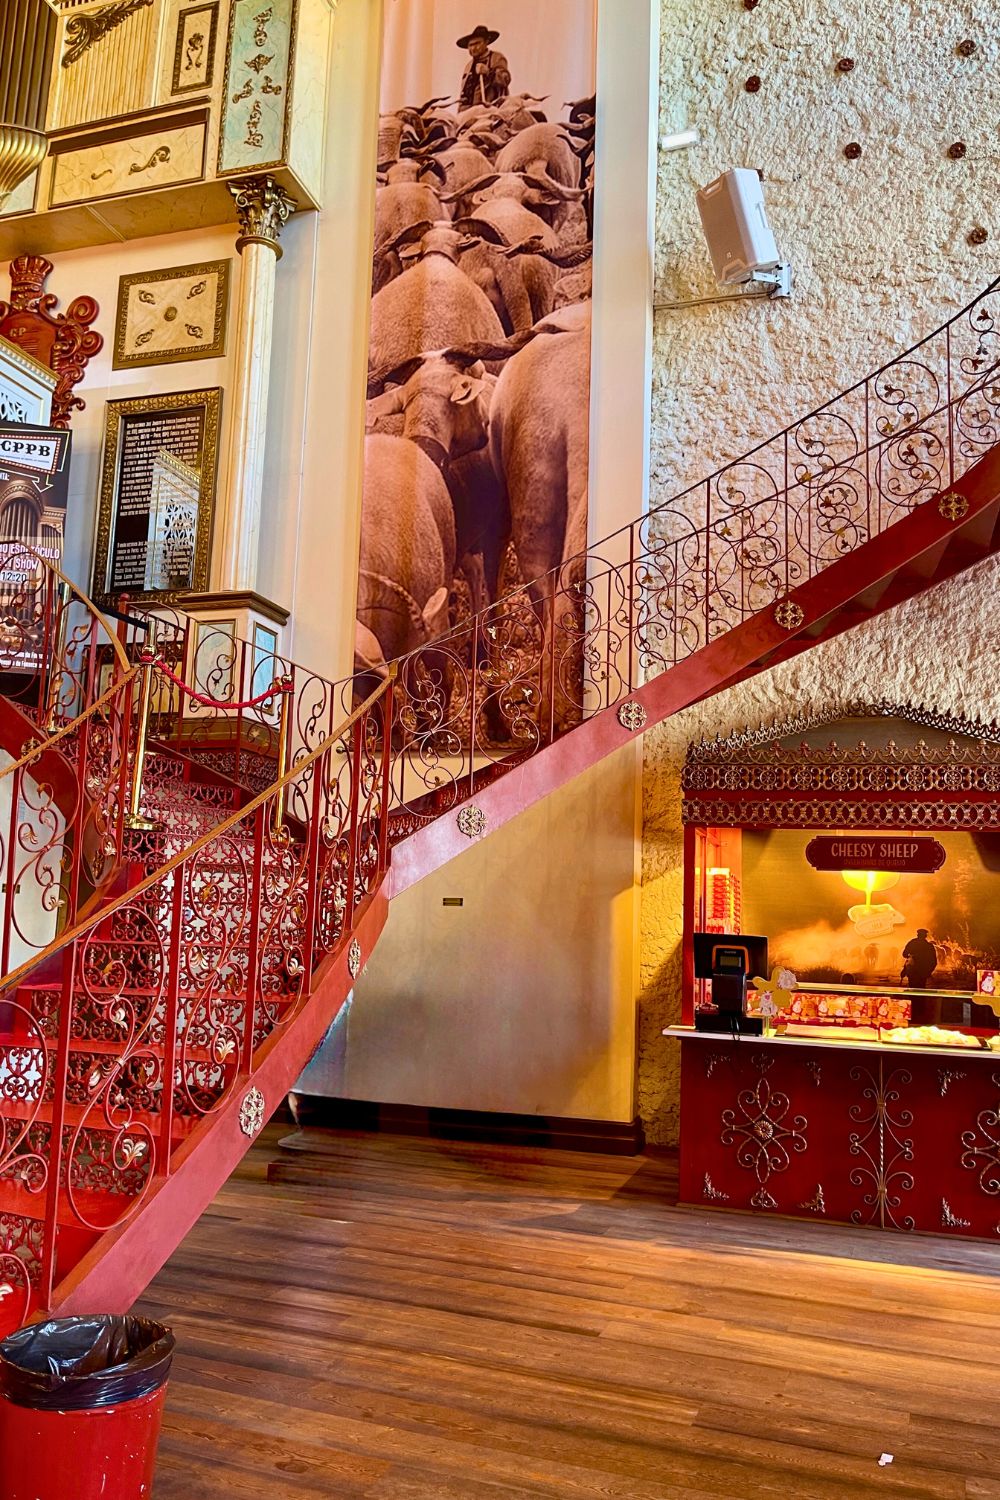 An ornate red staircase with decorative ironwork inside a vibrant and eclectic interior, featuring a large historic photograph and a 'Cheesy Sheep' food counter